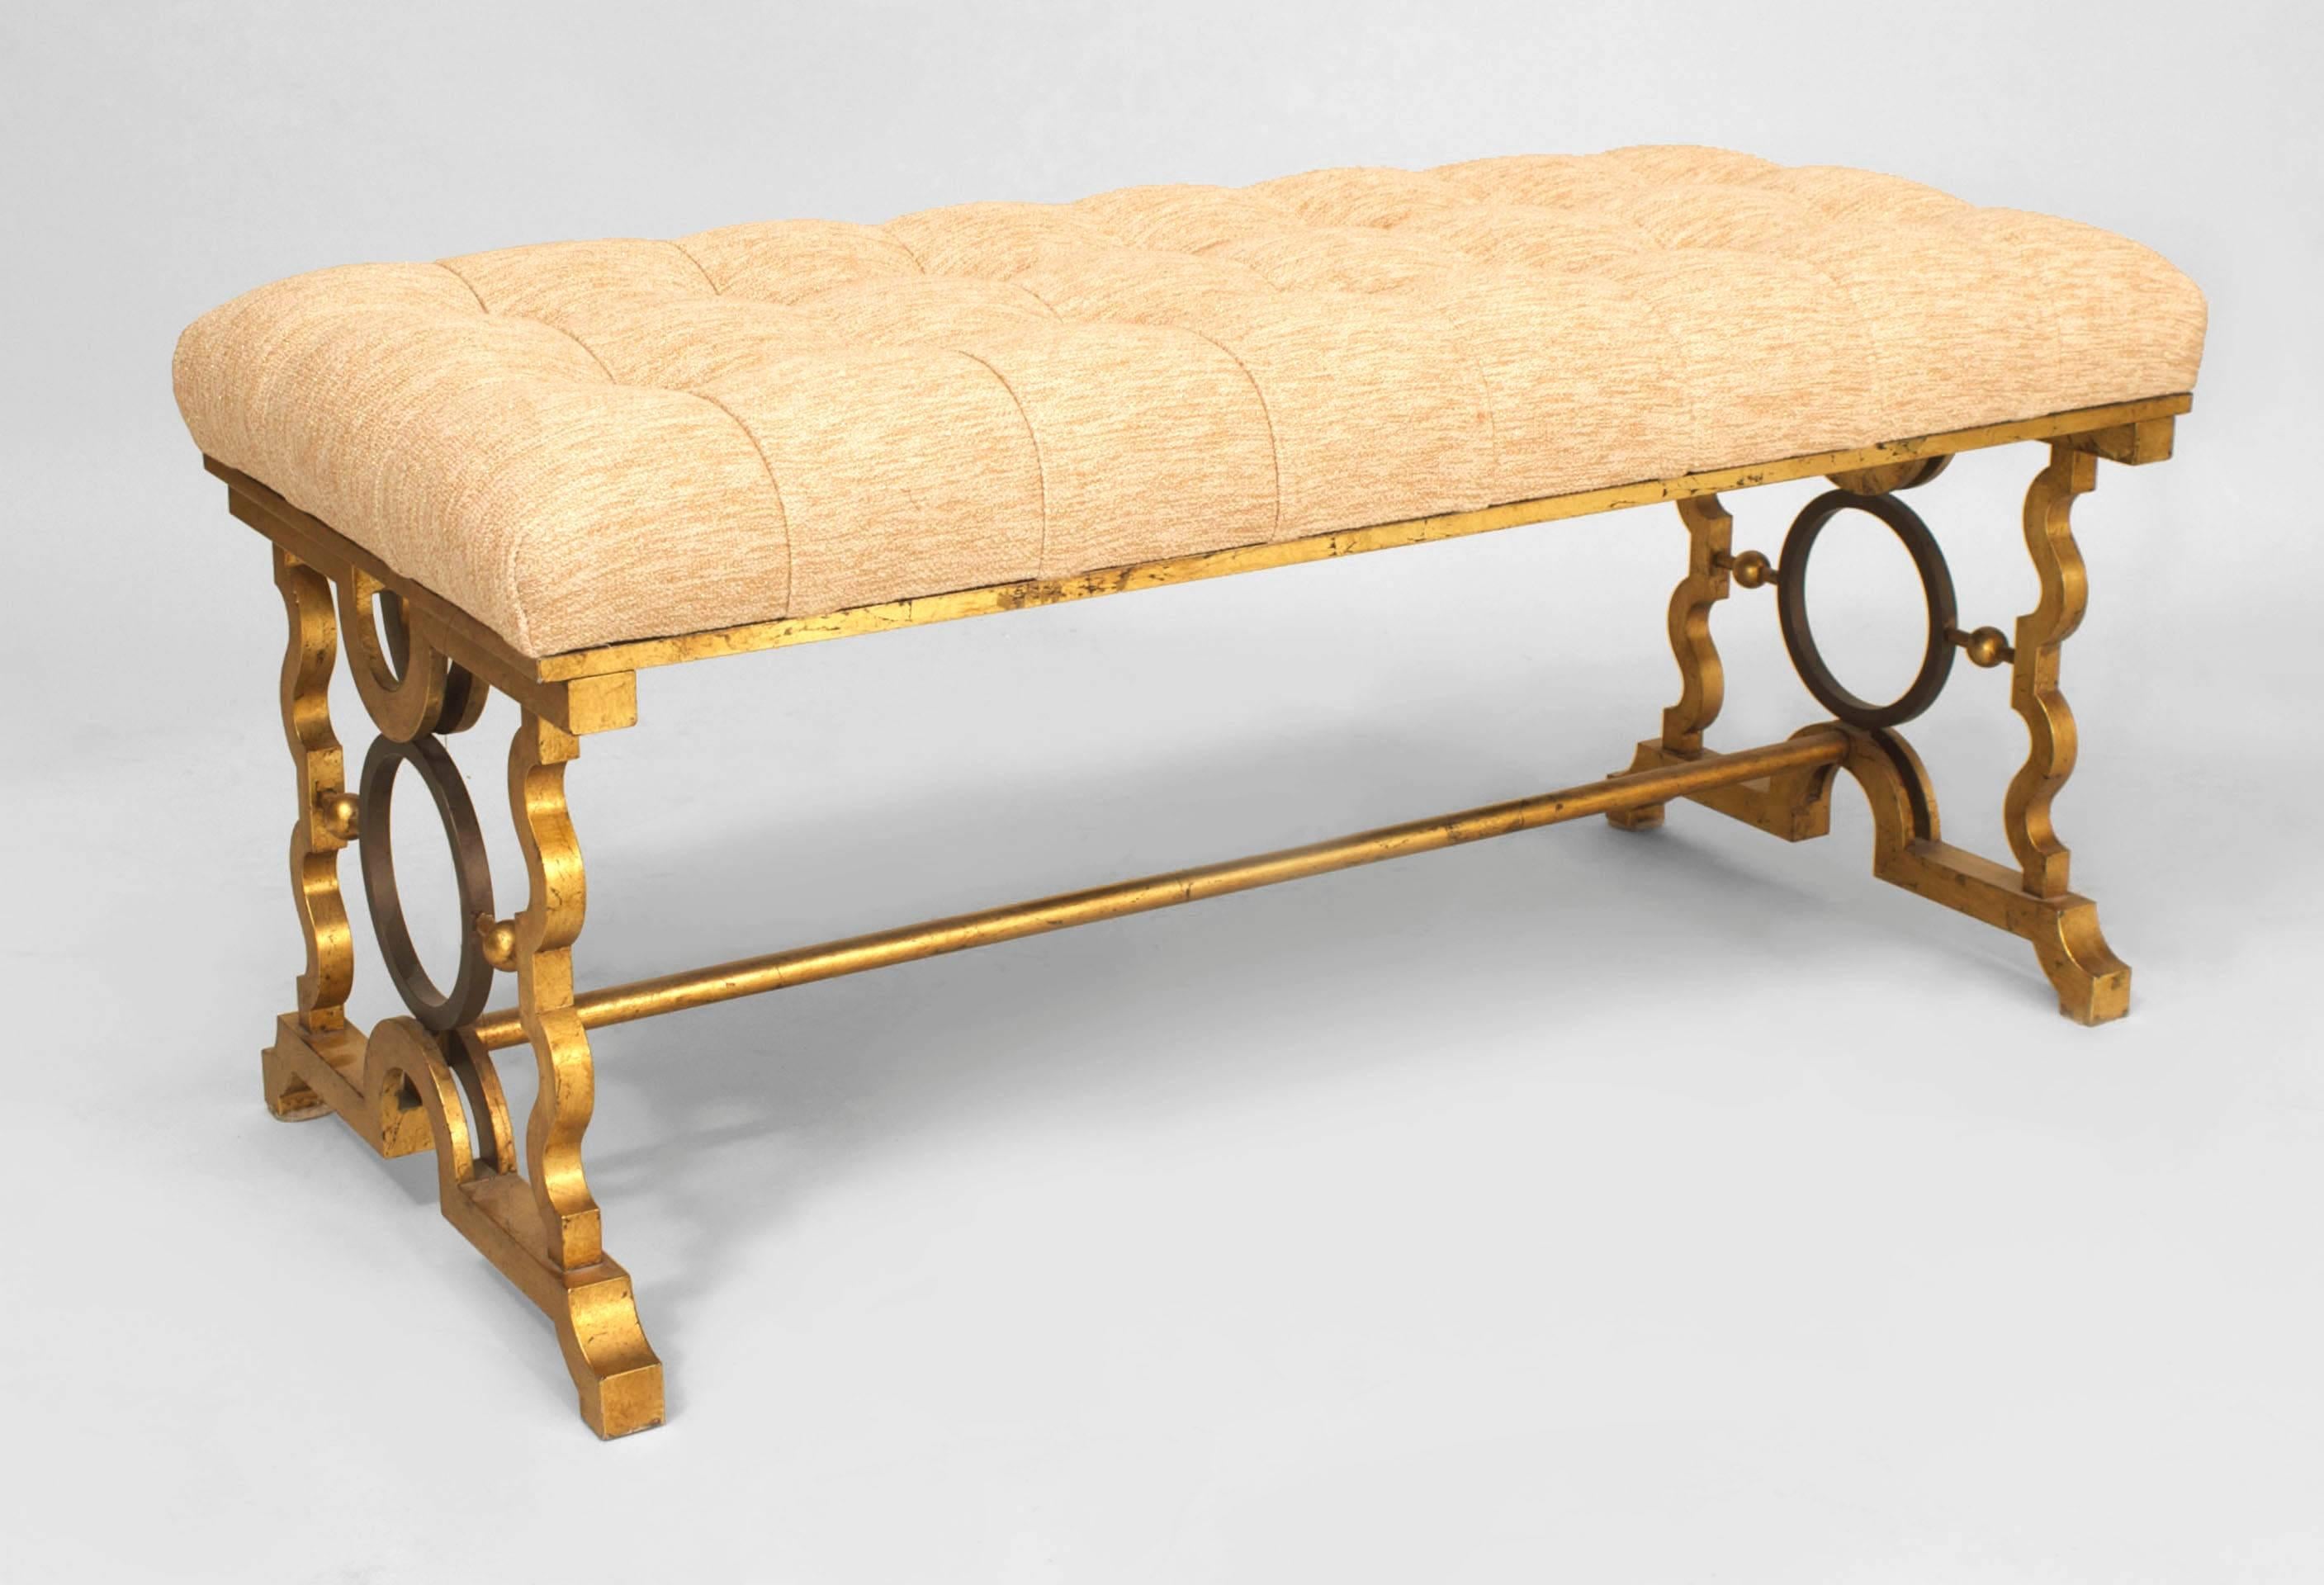 Pair of French 1940s style iron gold painted benches with open design & stretcher with tufted beige suede seat. (manner of GILBERT POILLERAT) (PRICED AS Pair).
